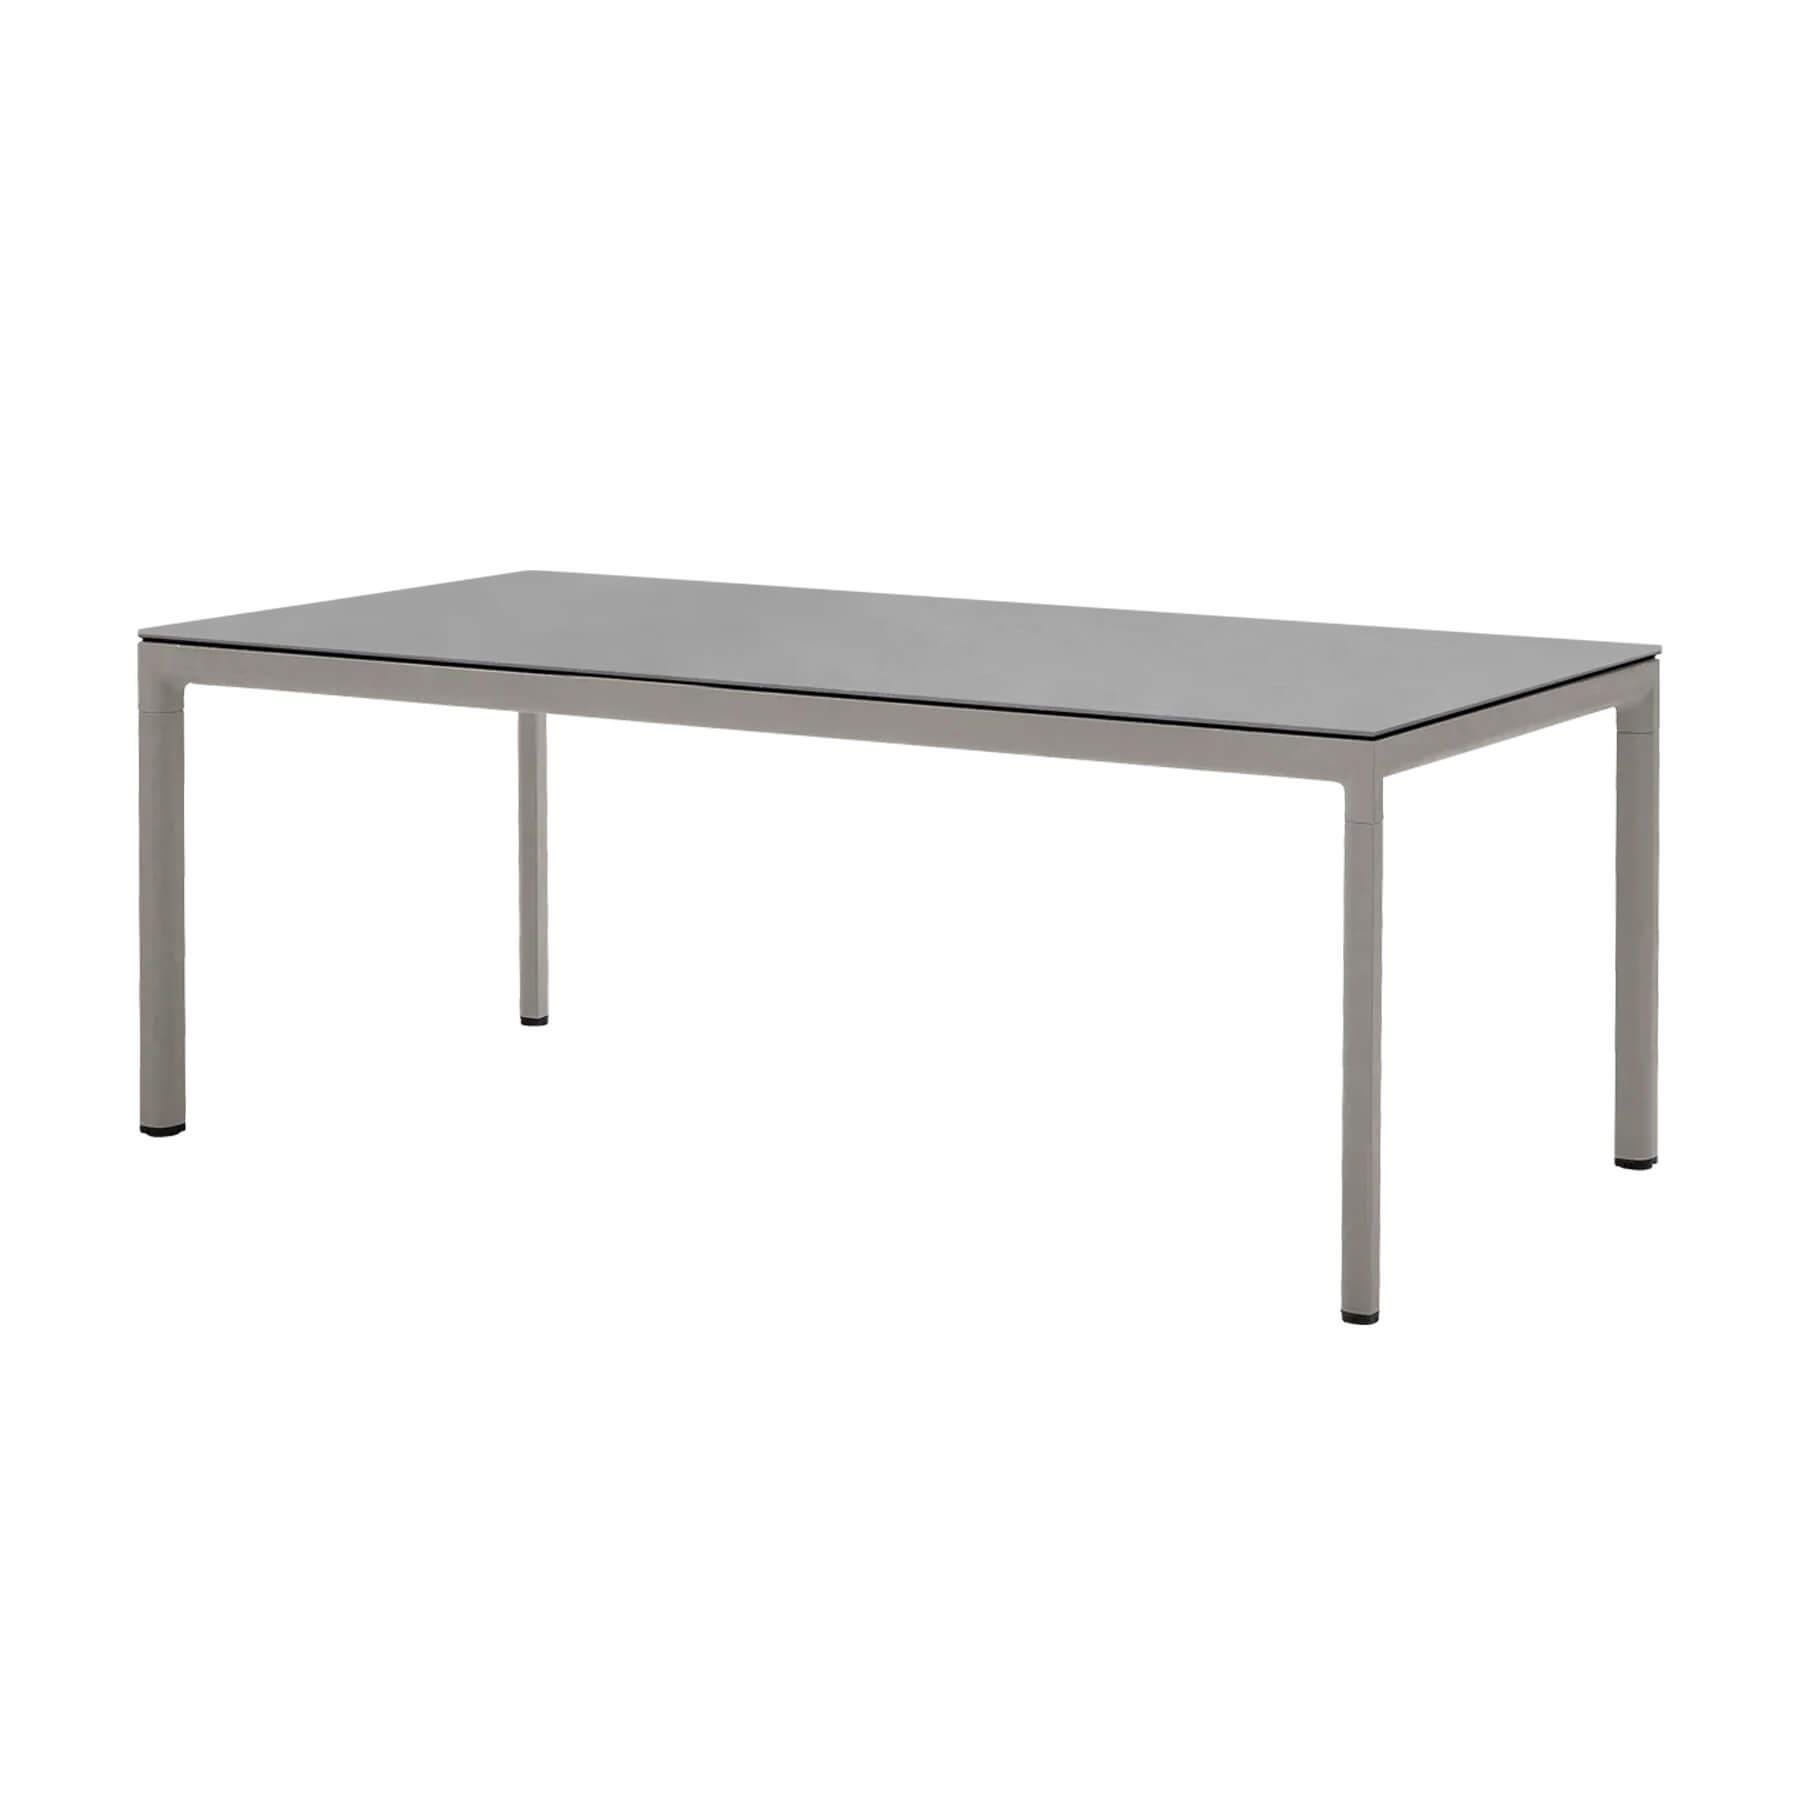 Caneline Drop Outdoor Dining Table Ceramic Concrete Grey Top Taupe Legs